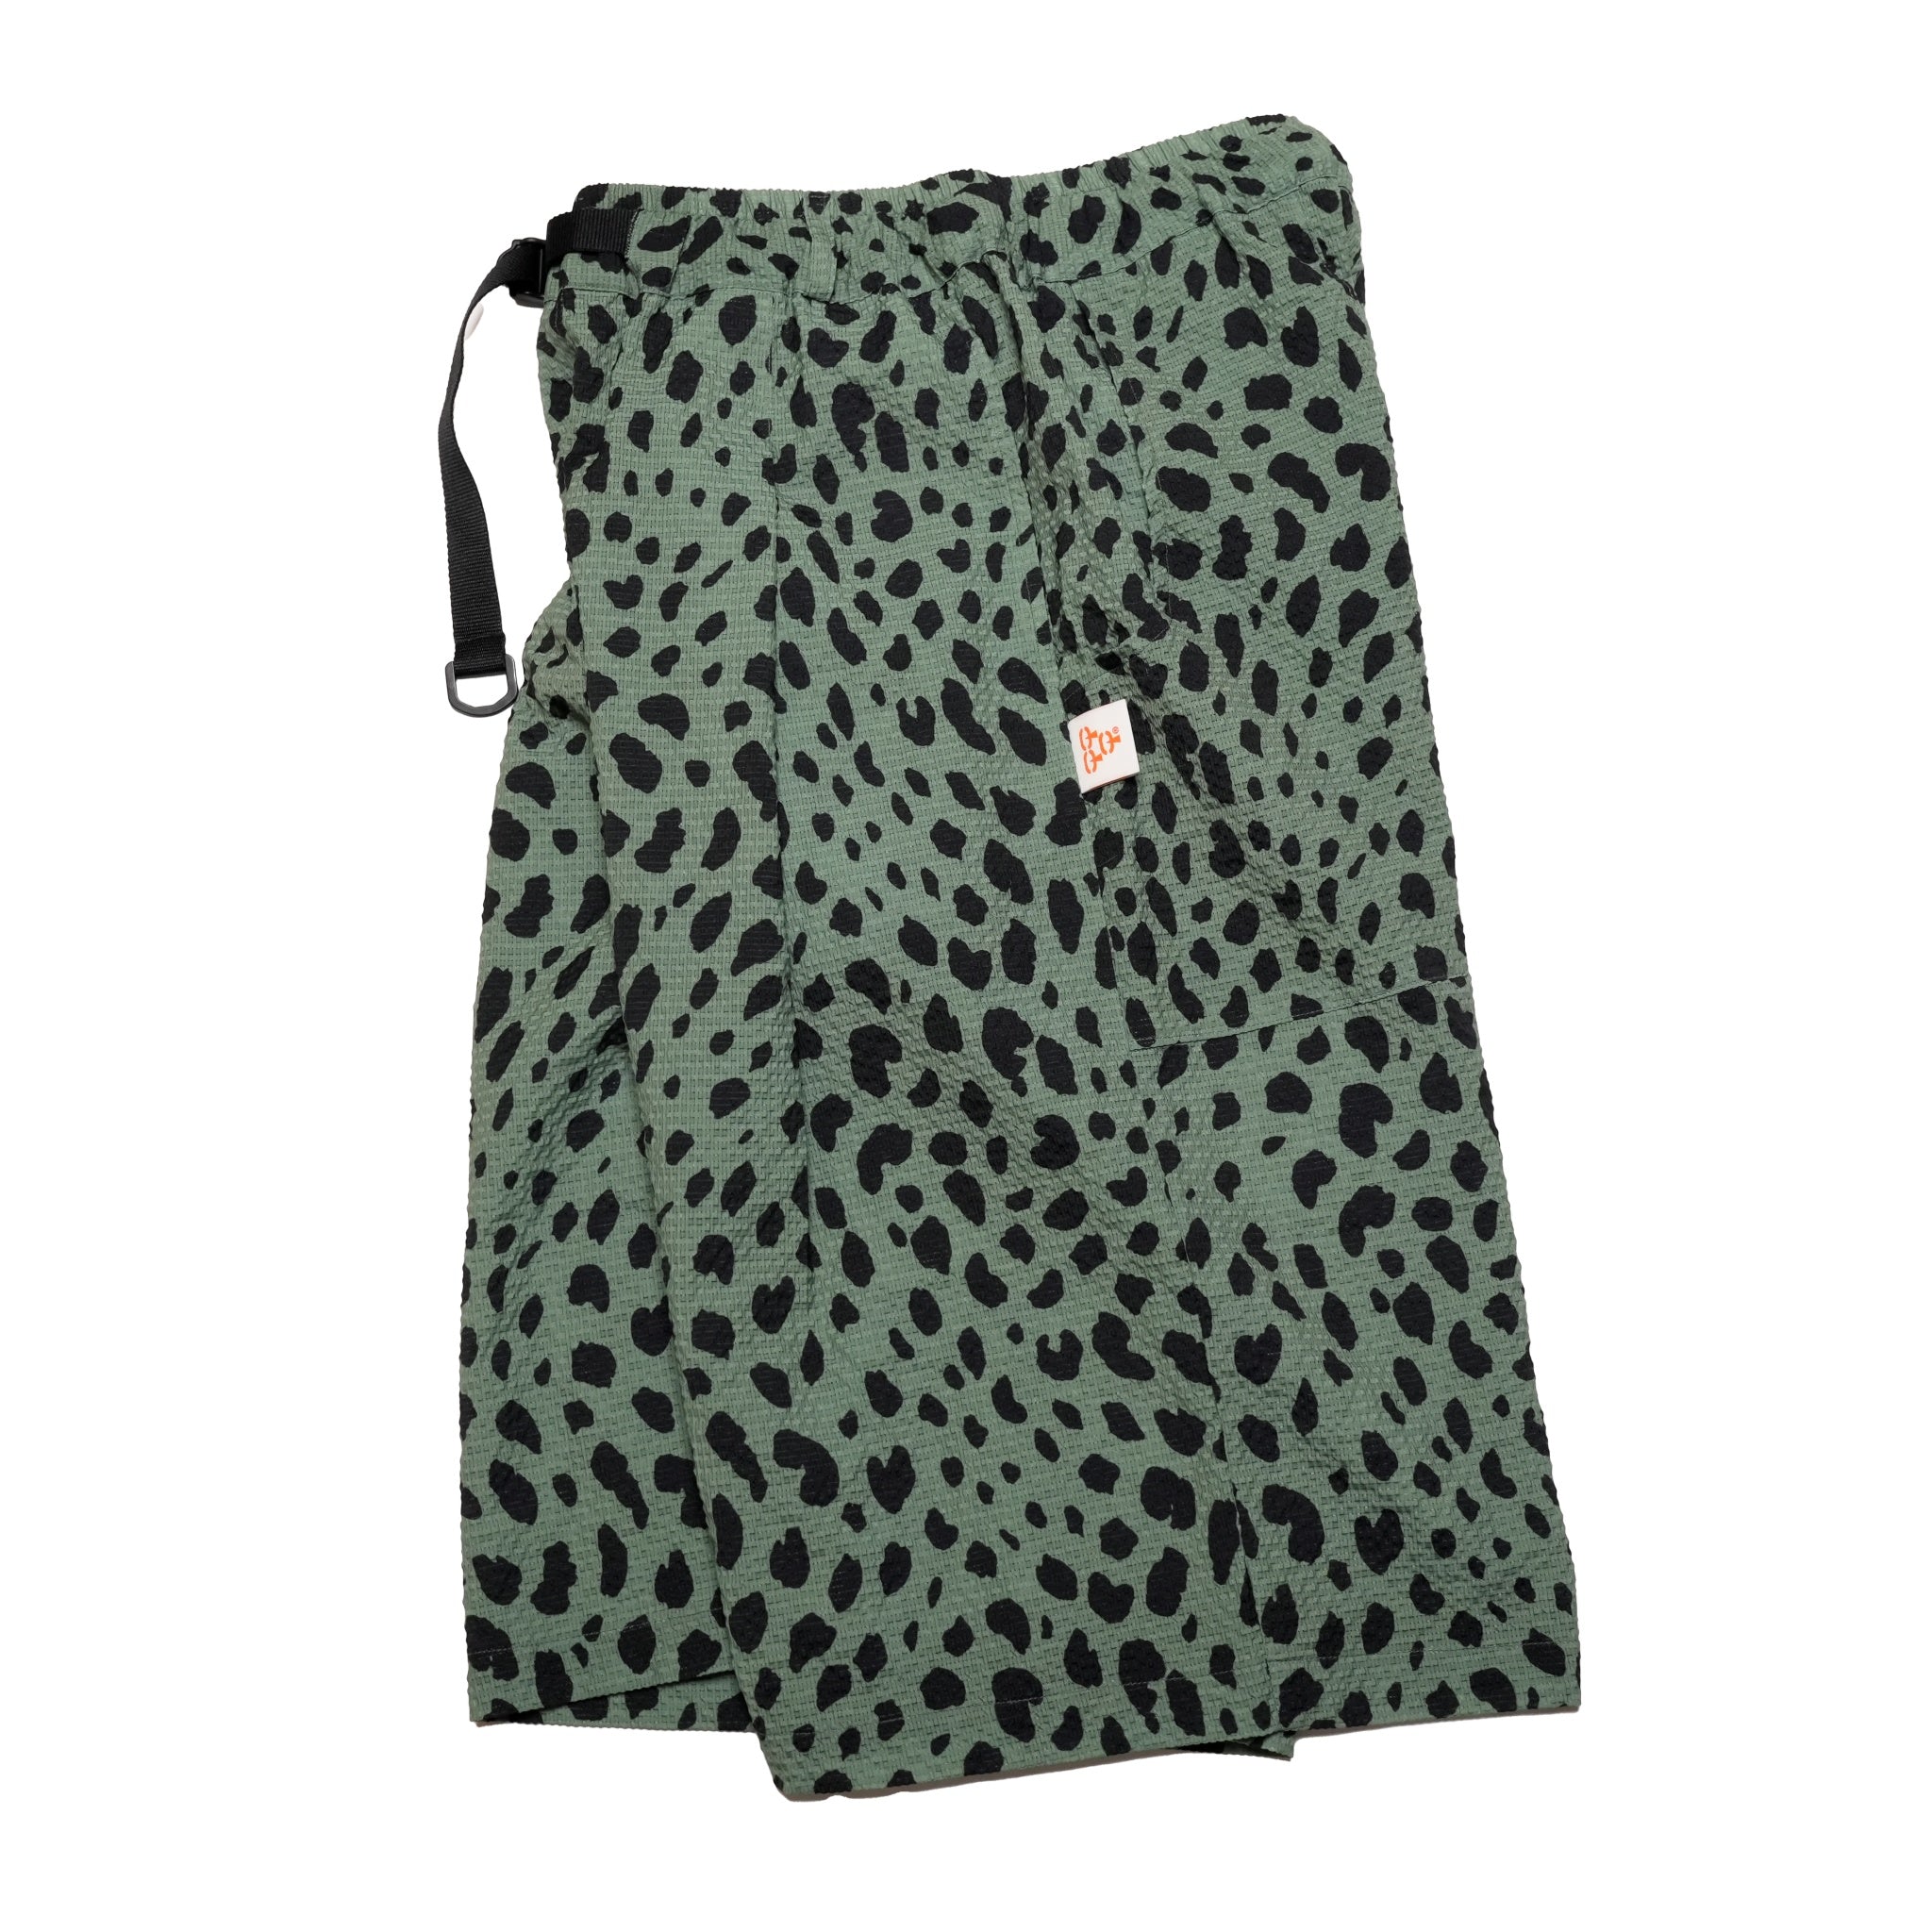 No:G62302_GN | Name:LEOPARD LONG WIDE SUMMER SHORTS-GN | COlor:Green【GORT_ゴート】